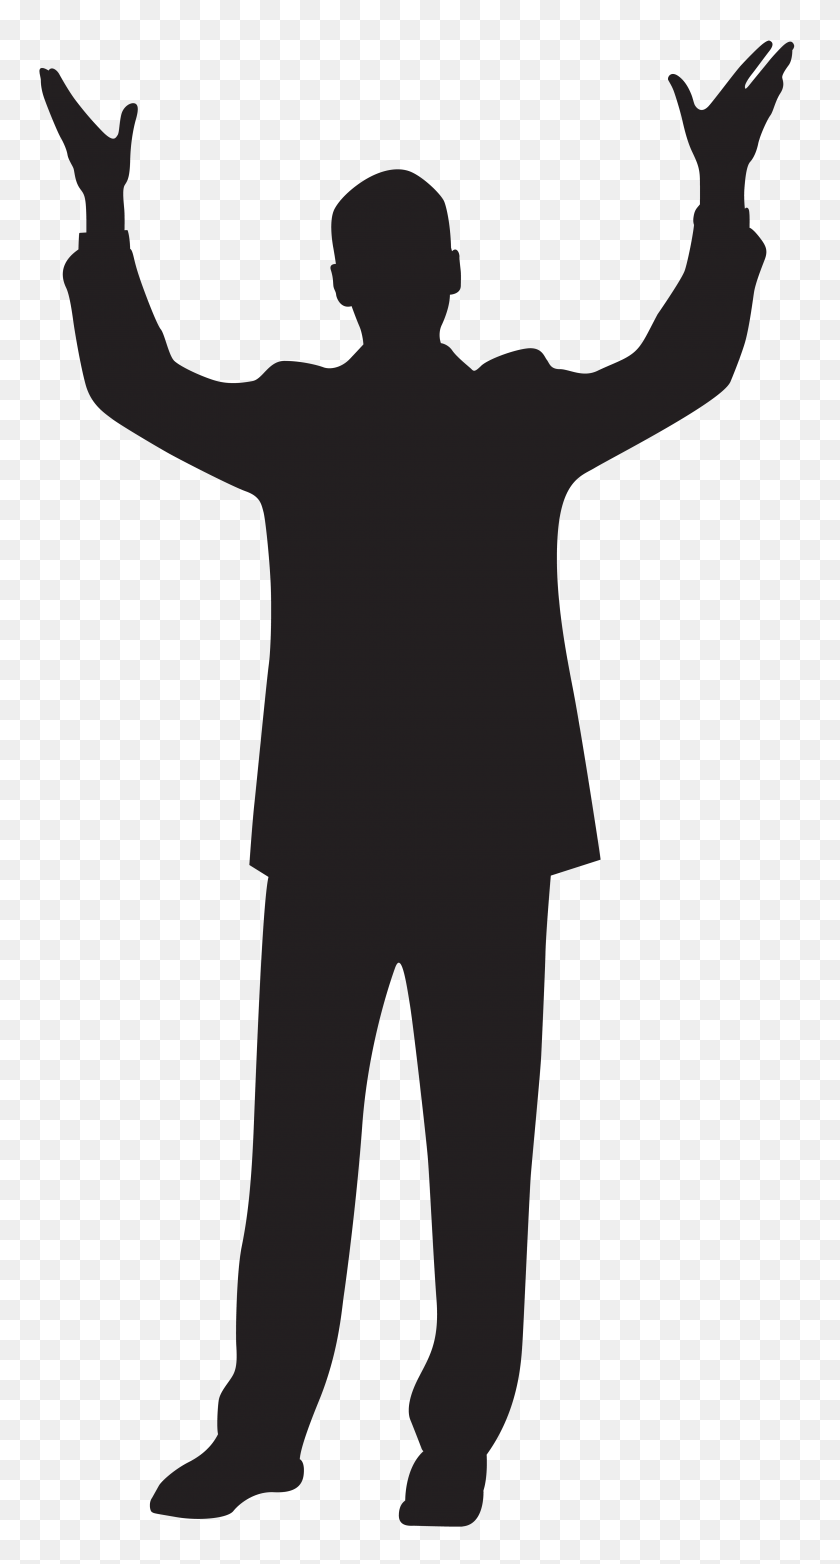 4147x8000 Man With Hands Up Silhouette Clip Art Gallery - Silhouette Man PNG